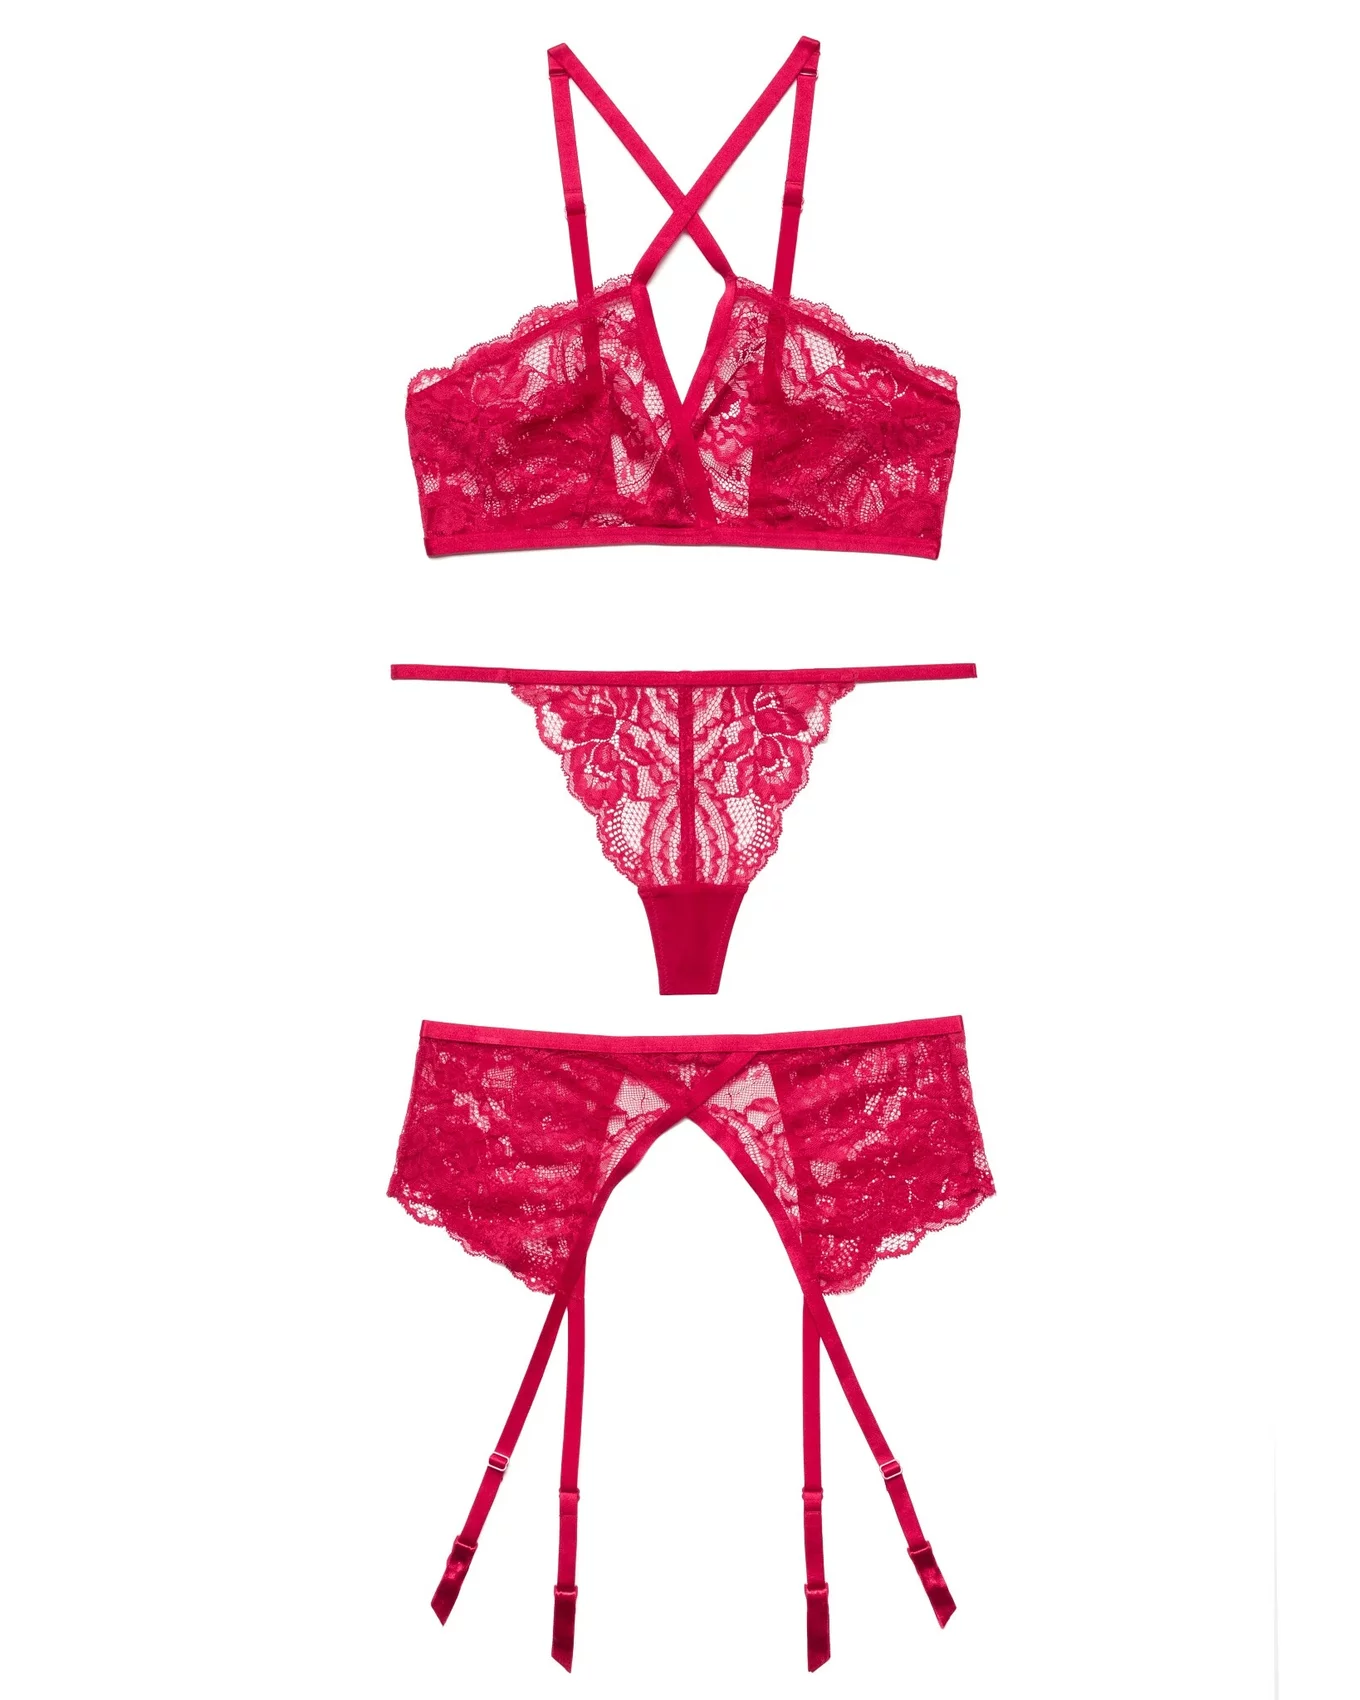 Lace Lingerie Three-Piece Set – The Gypsy Den